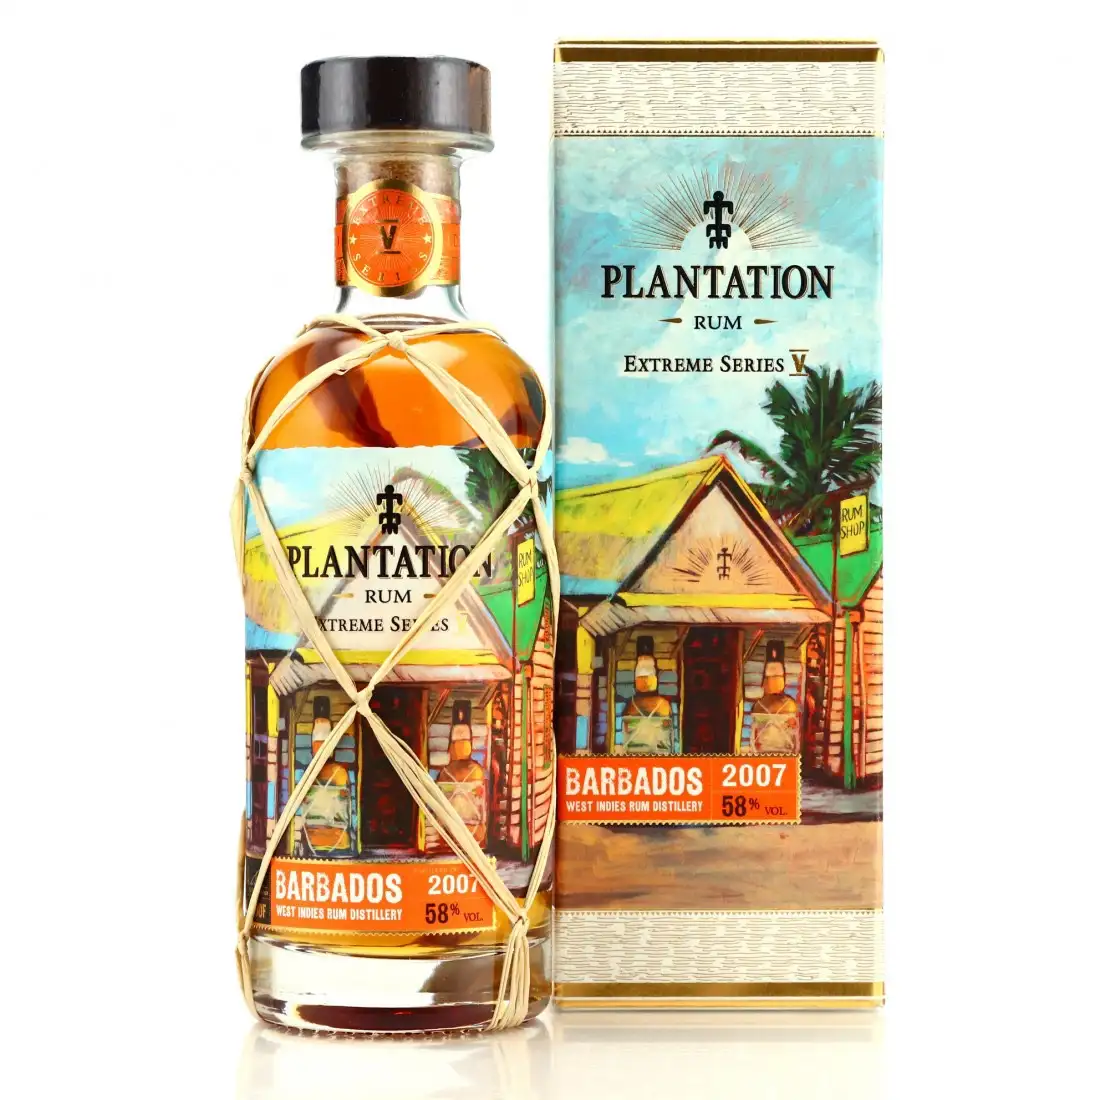 Image of the front of the bottle of the rum Plantation Extreme No. 5